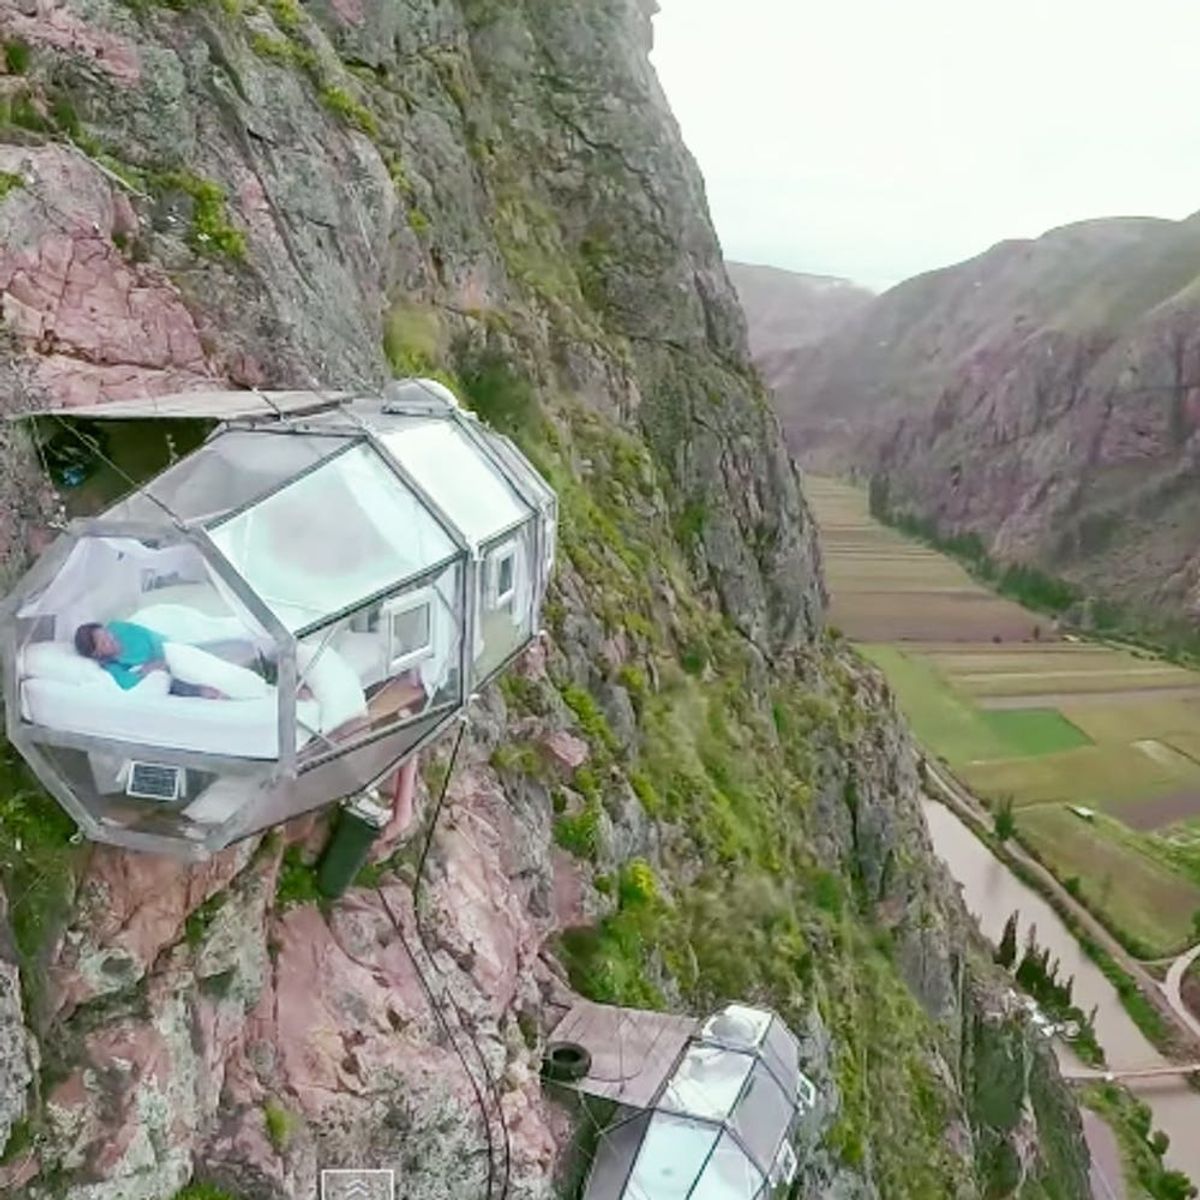 The World’s Most Picturesque Hotel Might Freak You Out